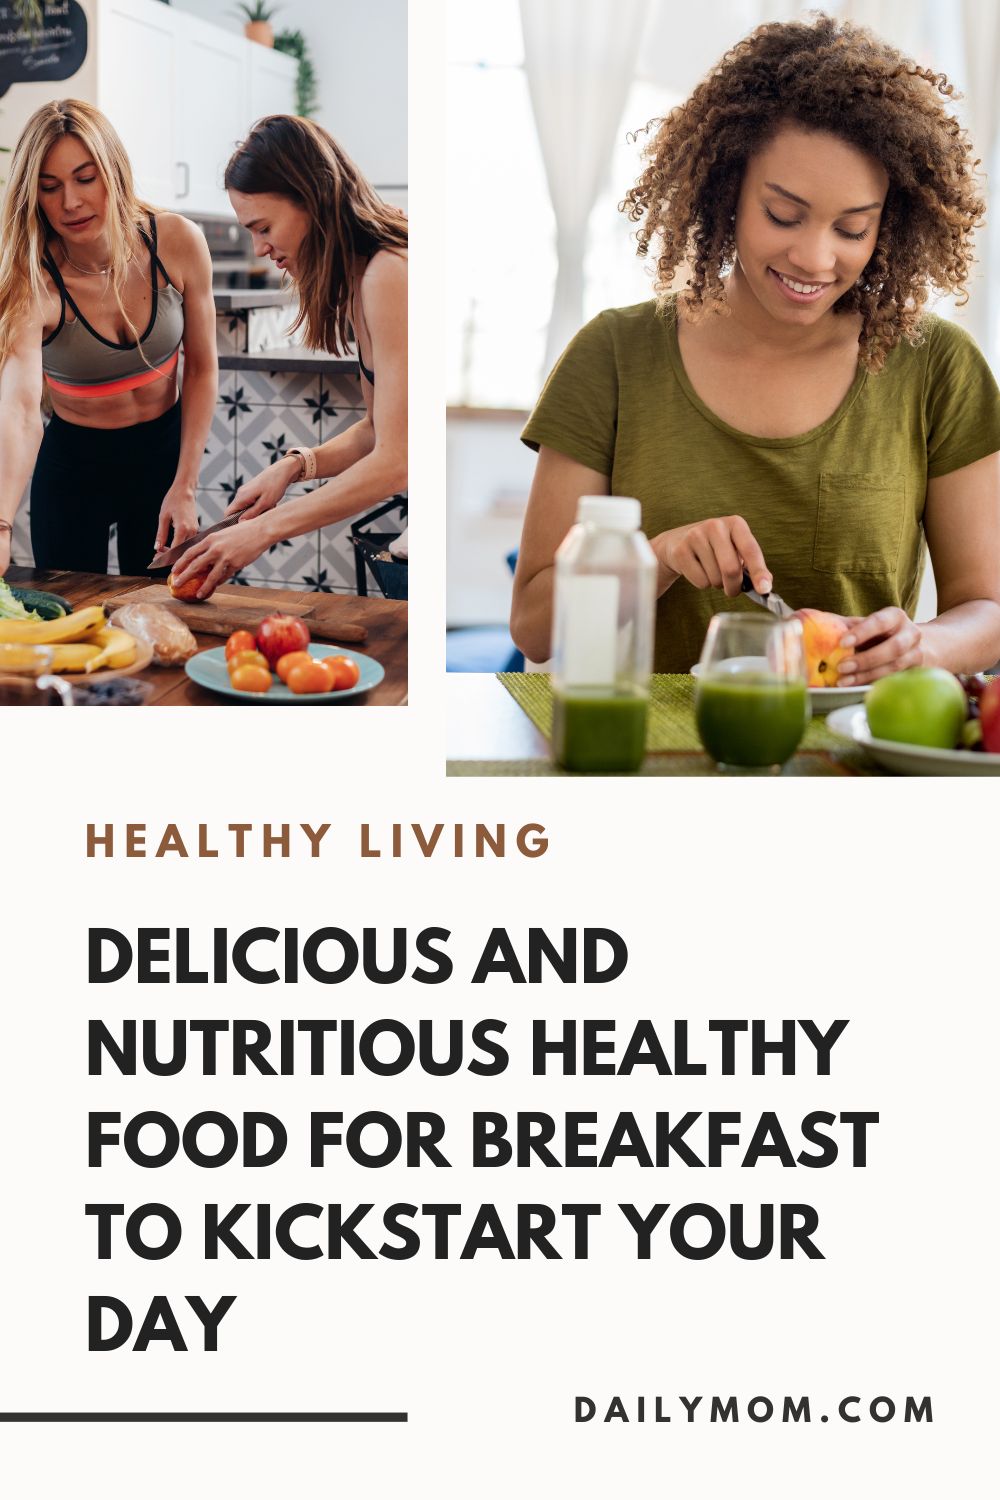 Delicious And Nutritious Healthy Food For Breakfast To Kickstart Your Day 20 Daily Mom, Magazine For Families